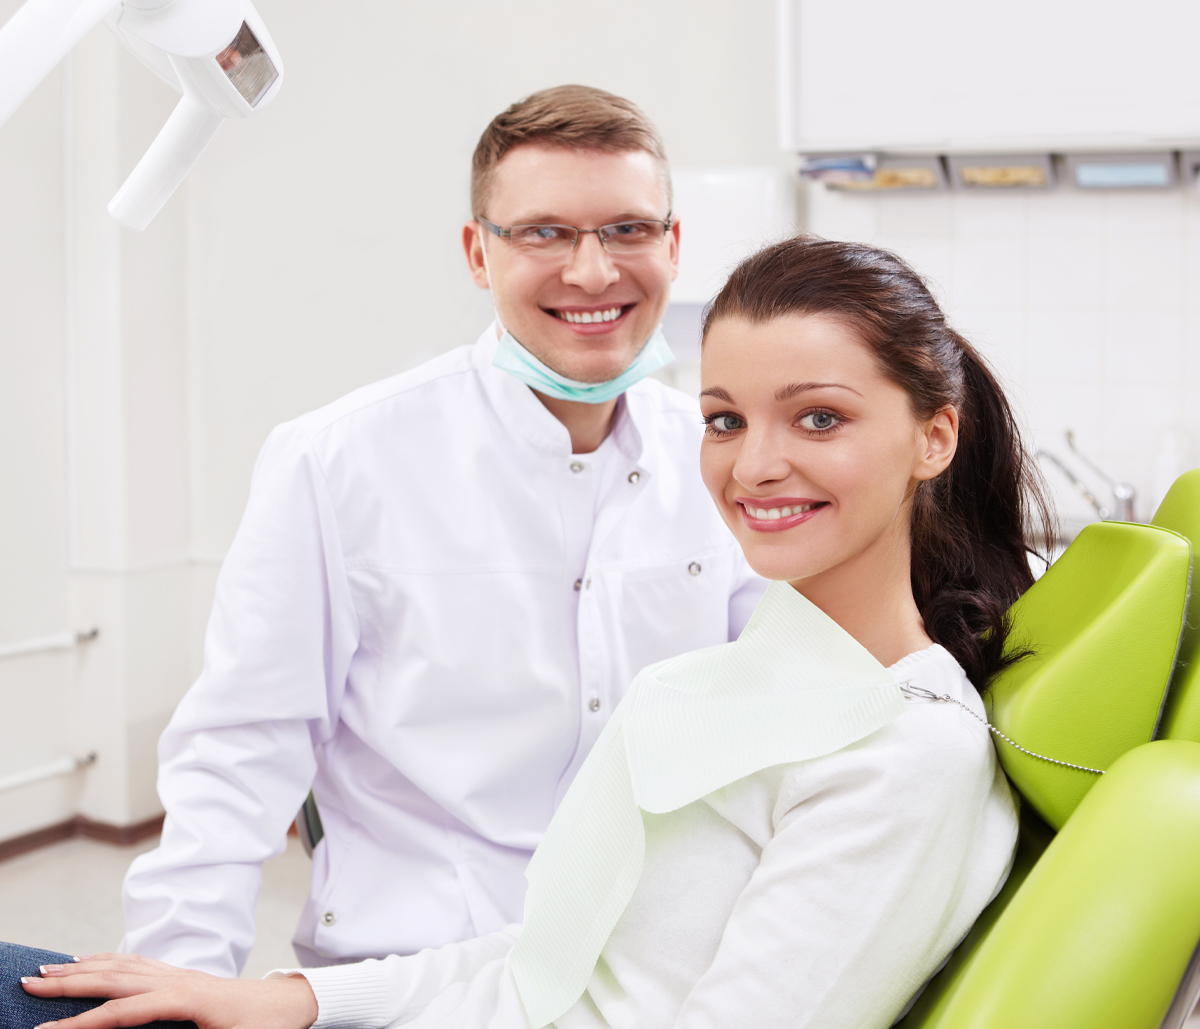 Oral Health Care Services for a Healthy, Beautiful Smile